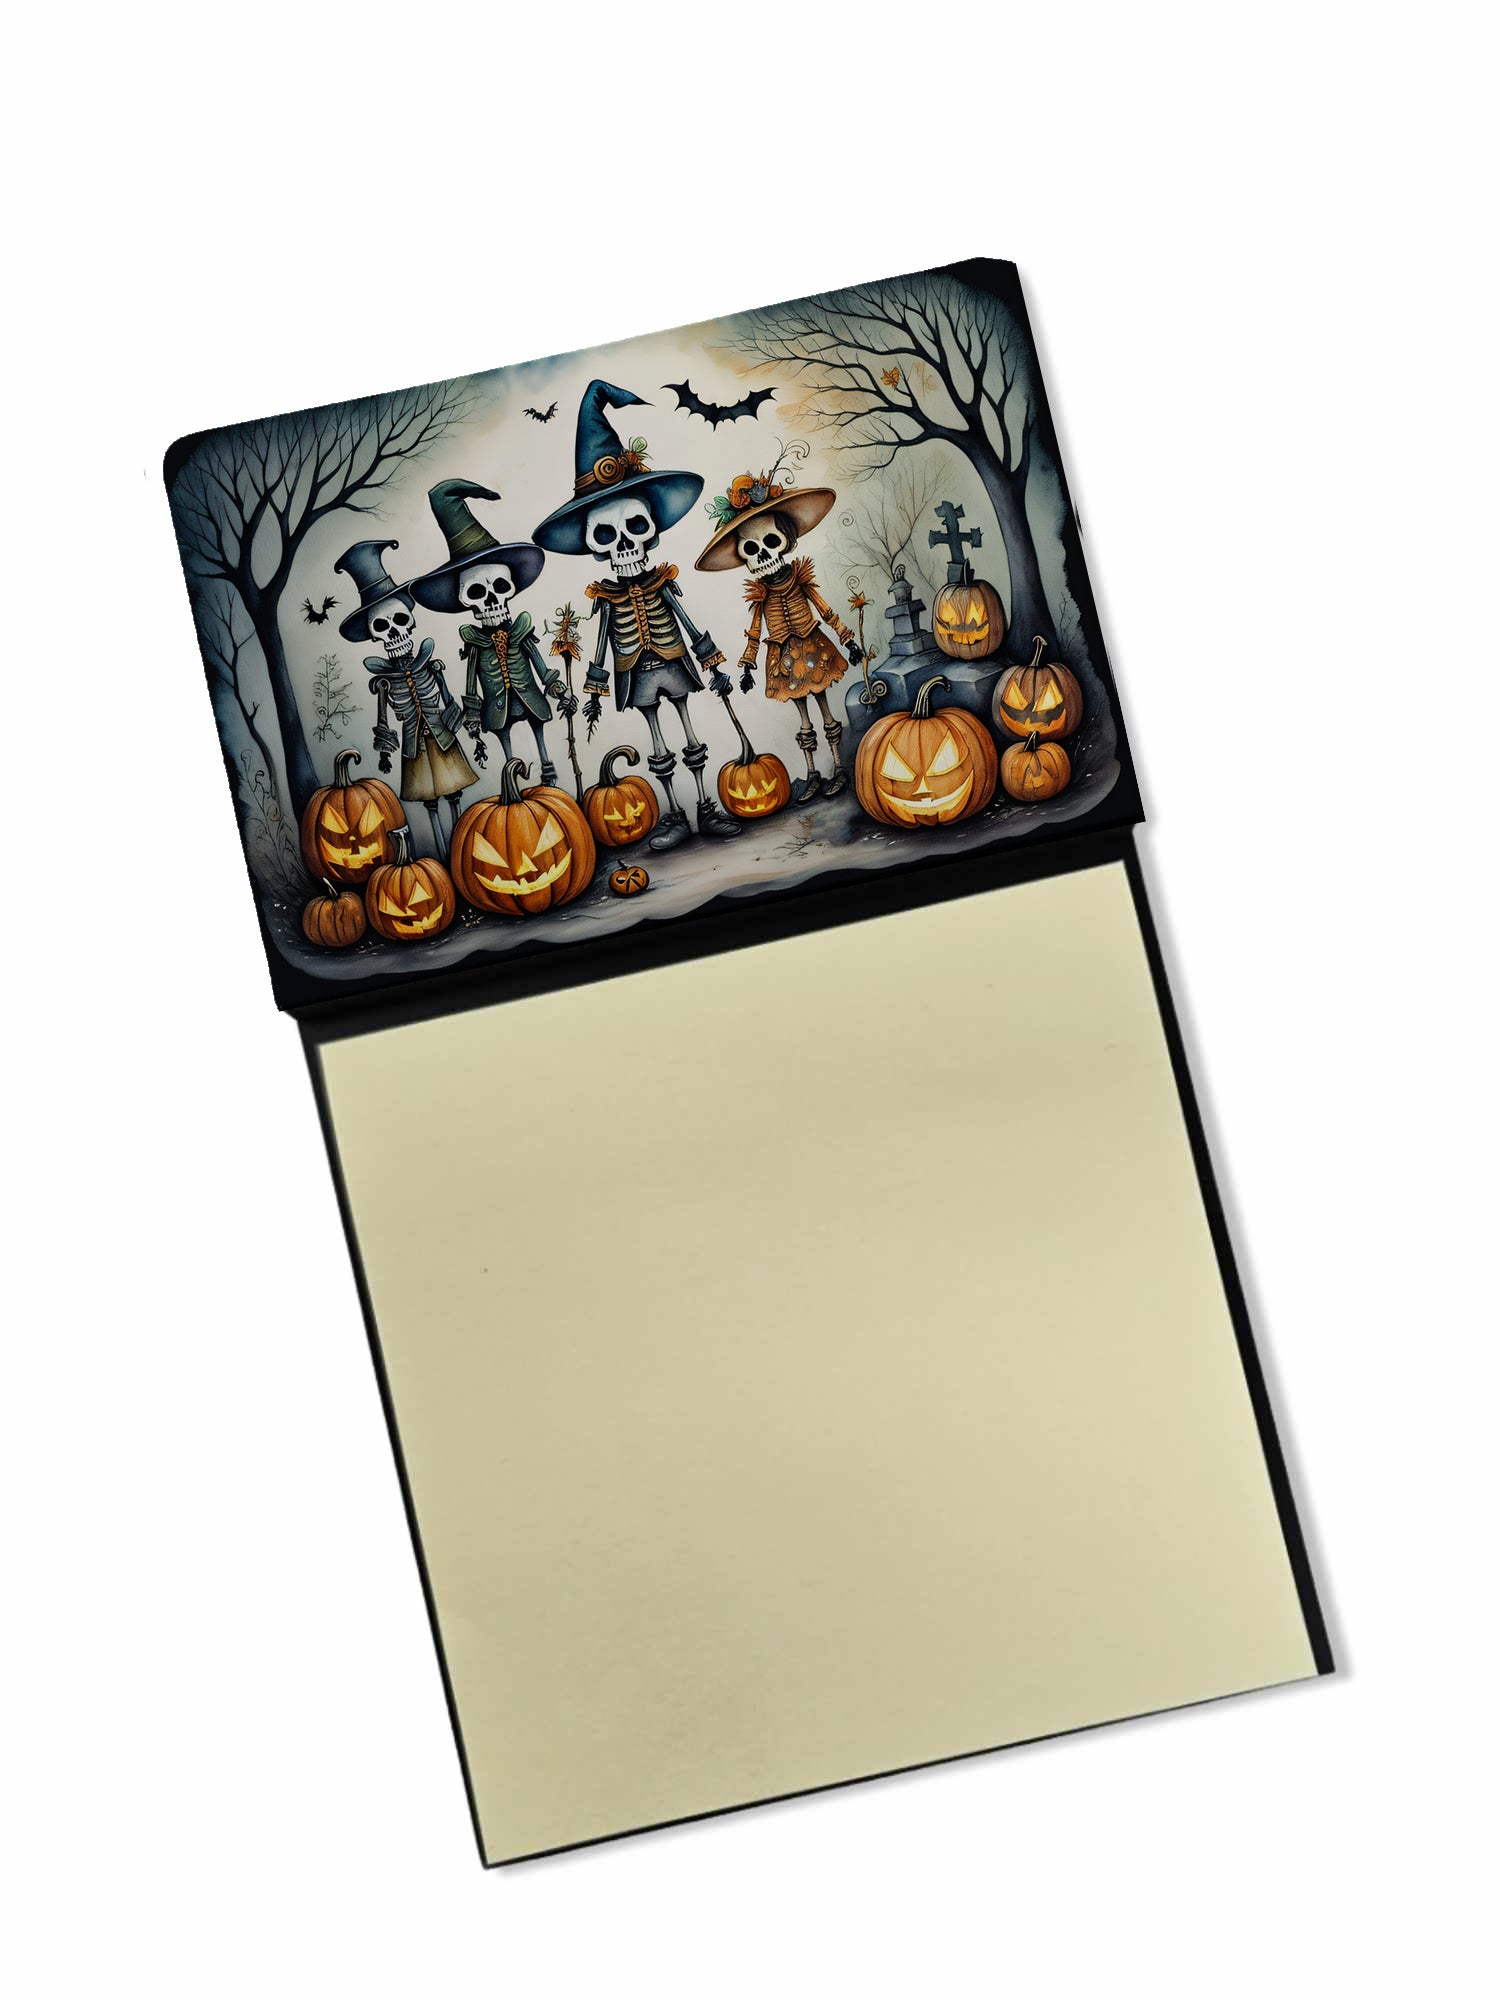 Buy this Calacas Skeletons Spooky Halloween Sticky Note Holder